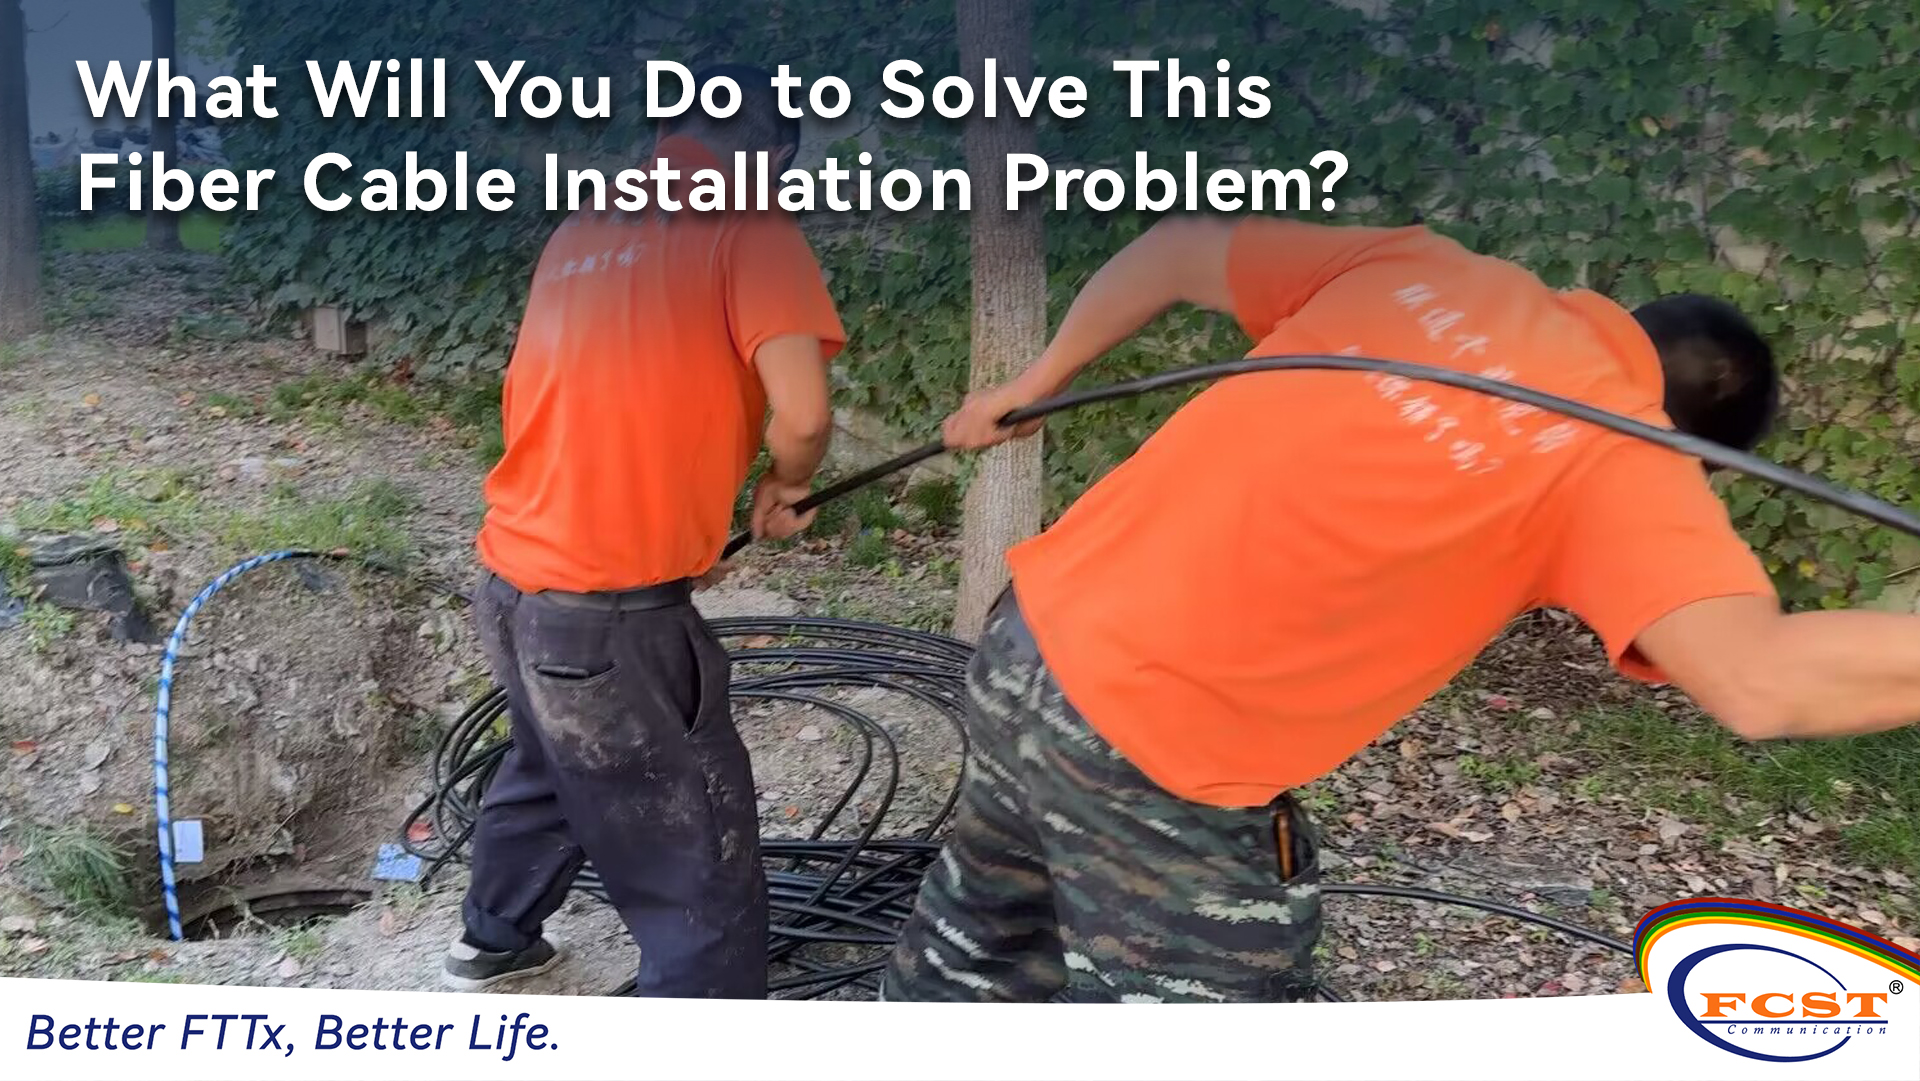 What Will You Do to Solve This Fiber Cable Installation Problem?